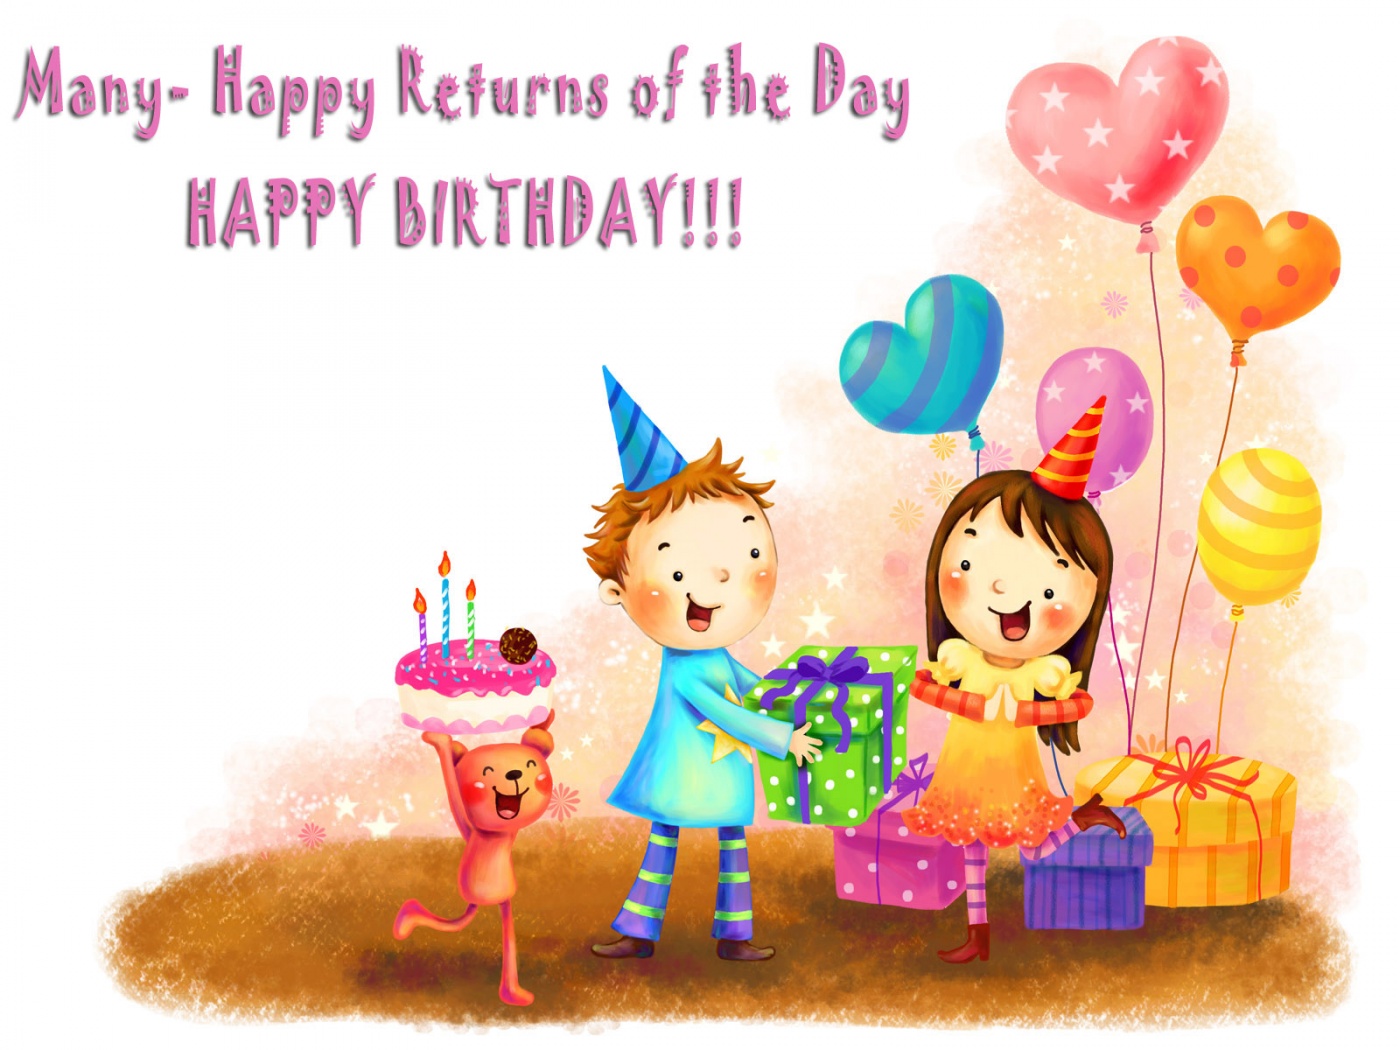 Happy birthday sister greeting cards hd wishes wallpapers 